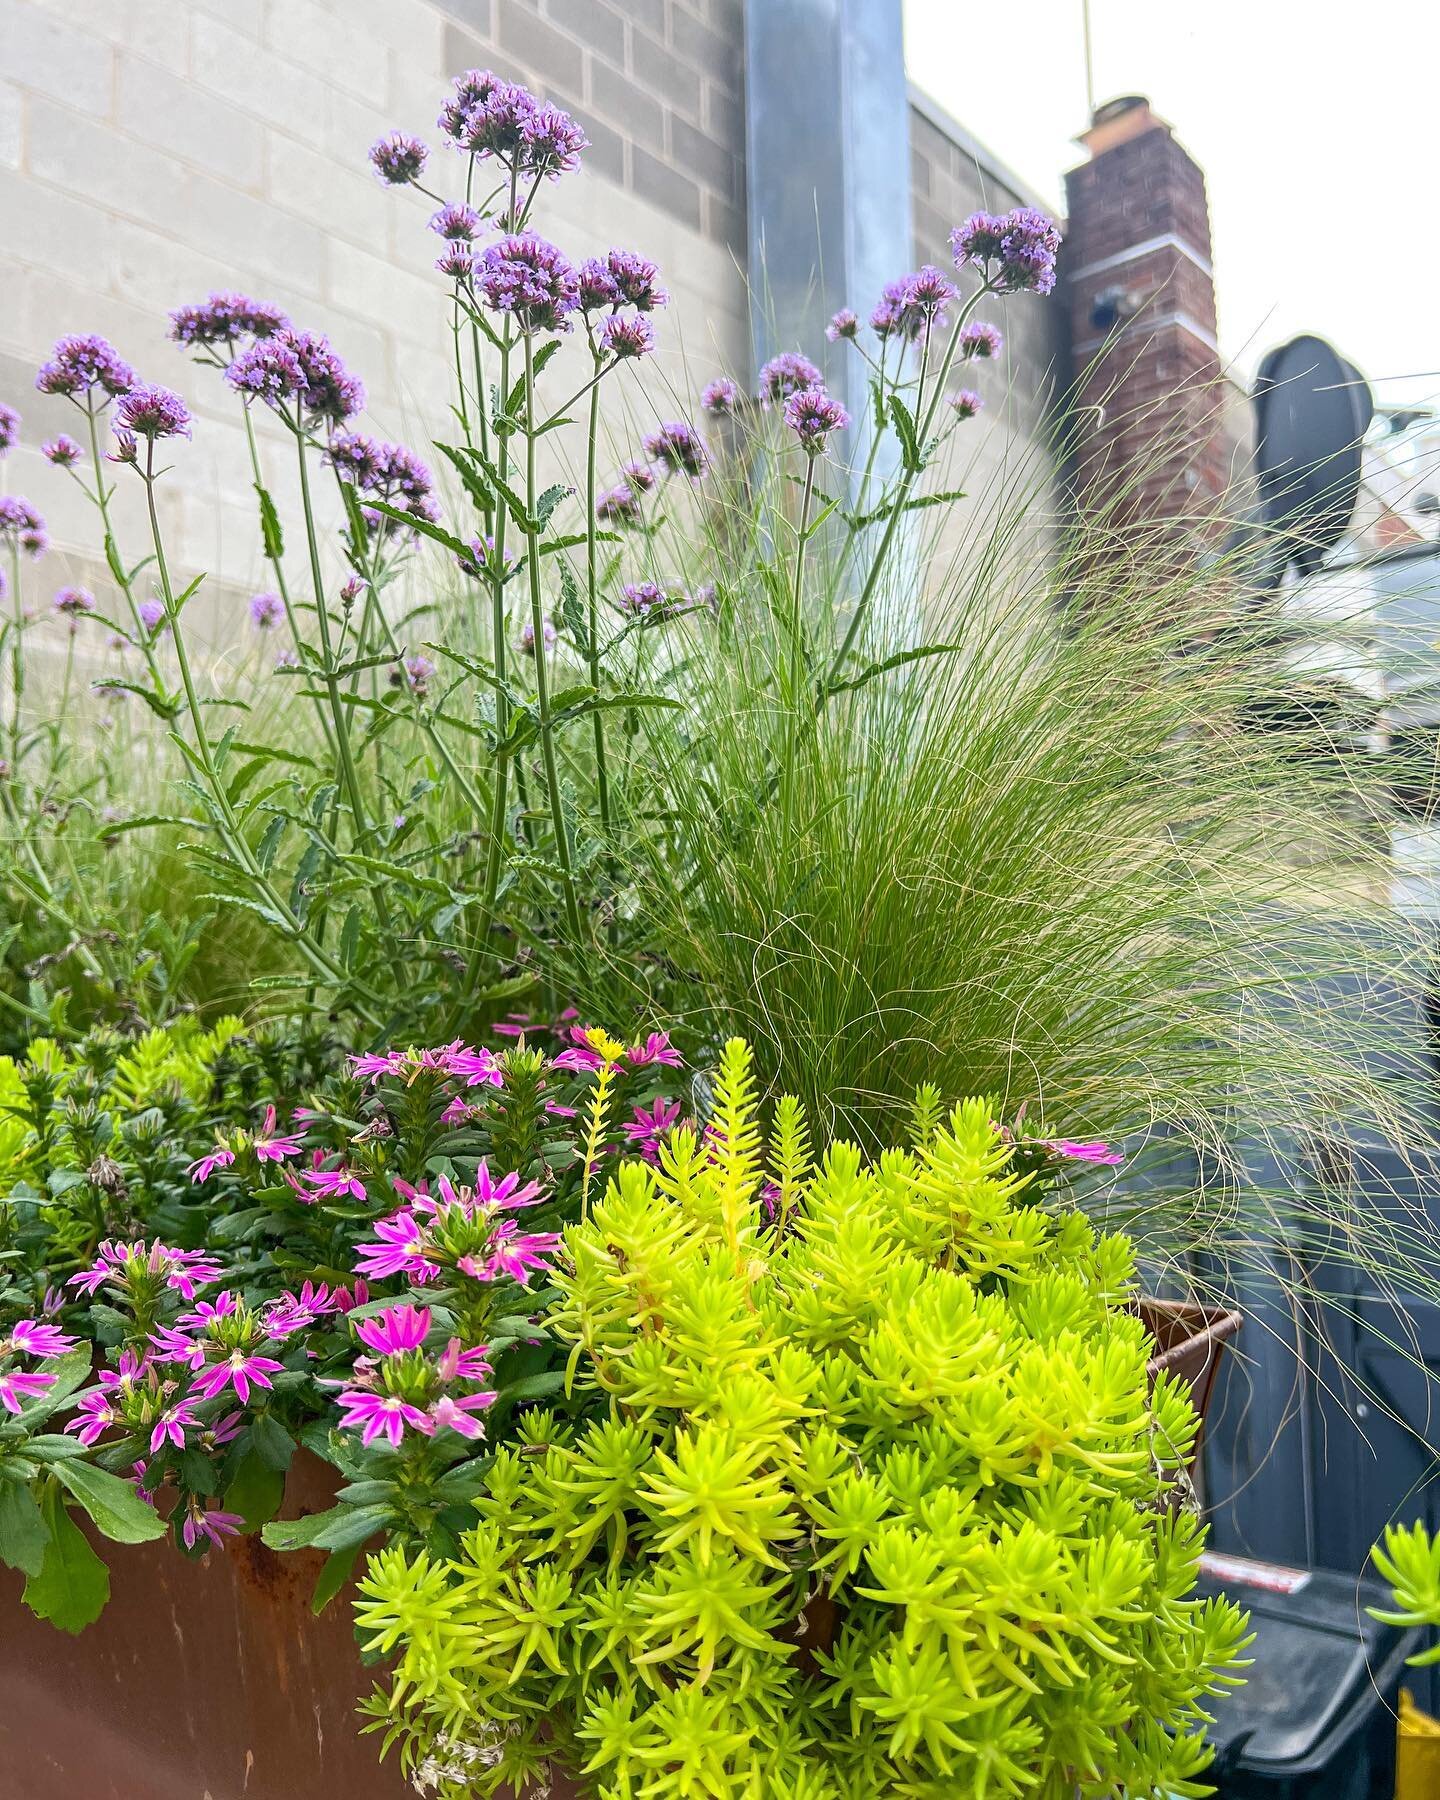 Summer check-ins this week and happy to see this drought-tolerant mix thriving! Mexican feather grass and lemon sedum is putting me in the mood for a margarita 😉 @southendthebackend @southenduncorked 

#bloomcraft #summerplanters #droughttolerantpla